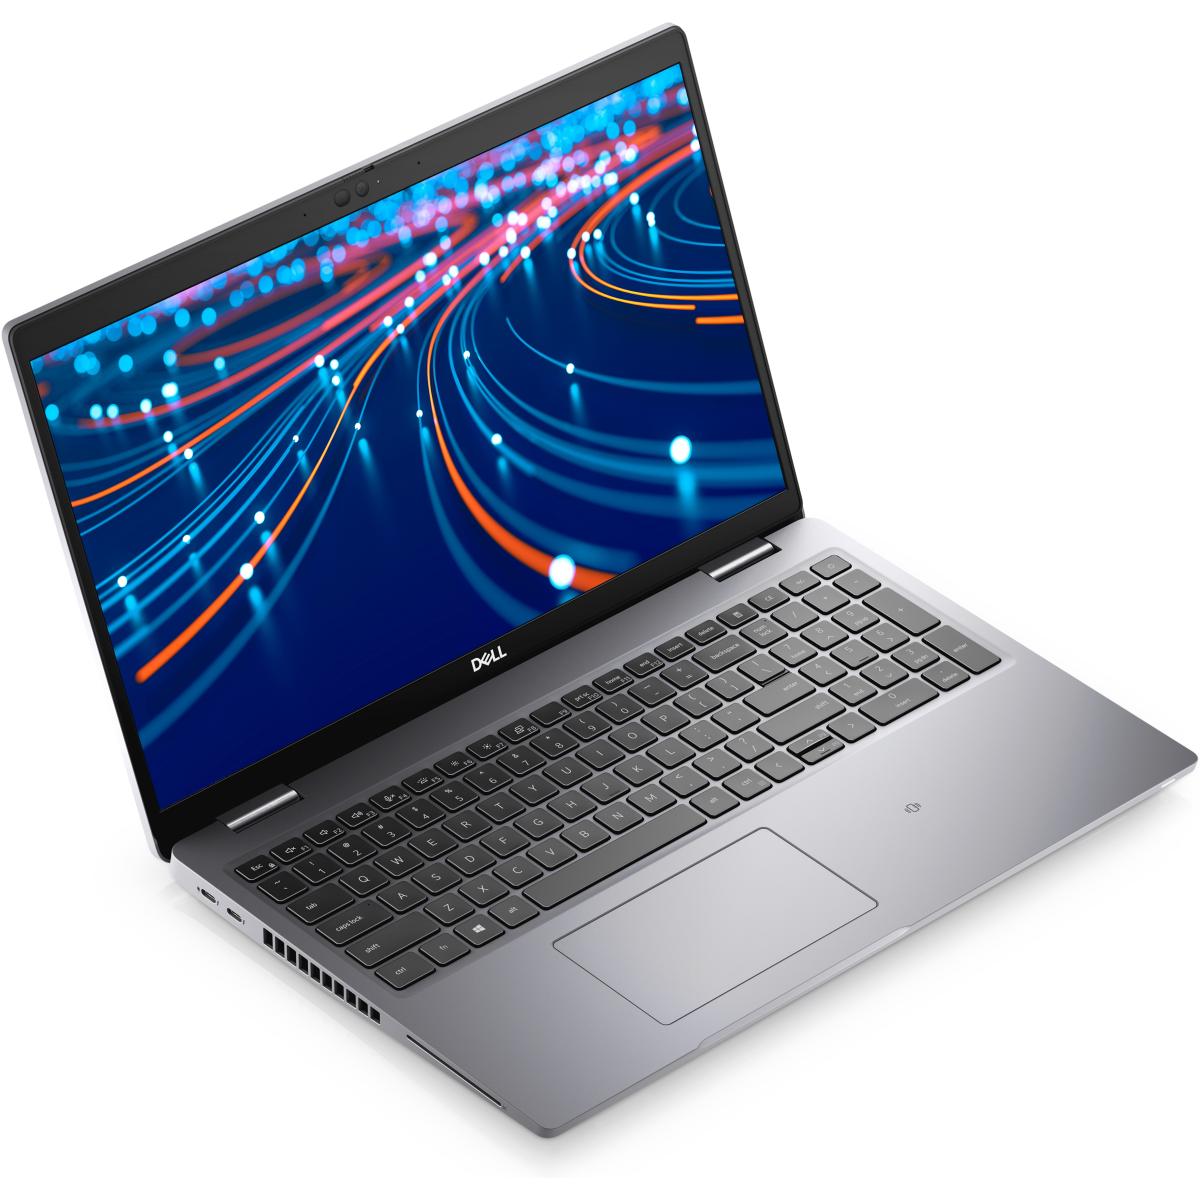 Dell Latitude 5520 Full HD Business Laptop | Green Dara Stars for Computers